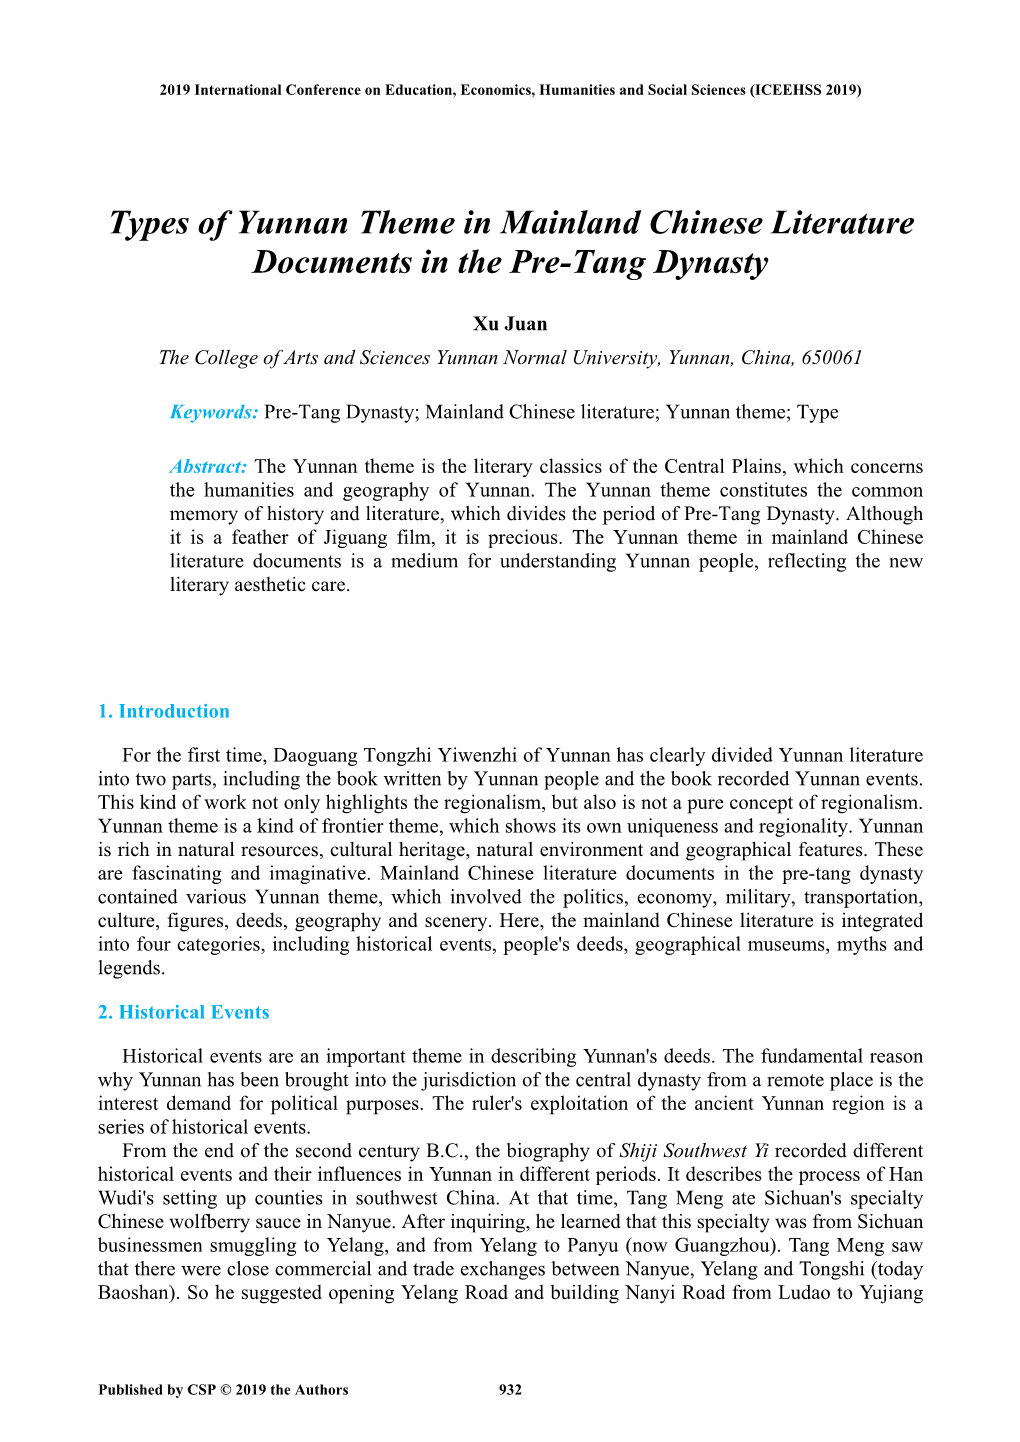 Types of Yunnan Theme in Mainland Chinese Literature Documents in the Pre-Tang Dynasty